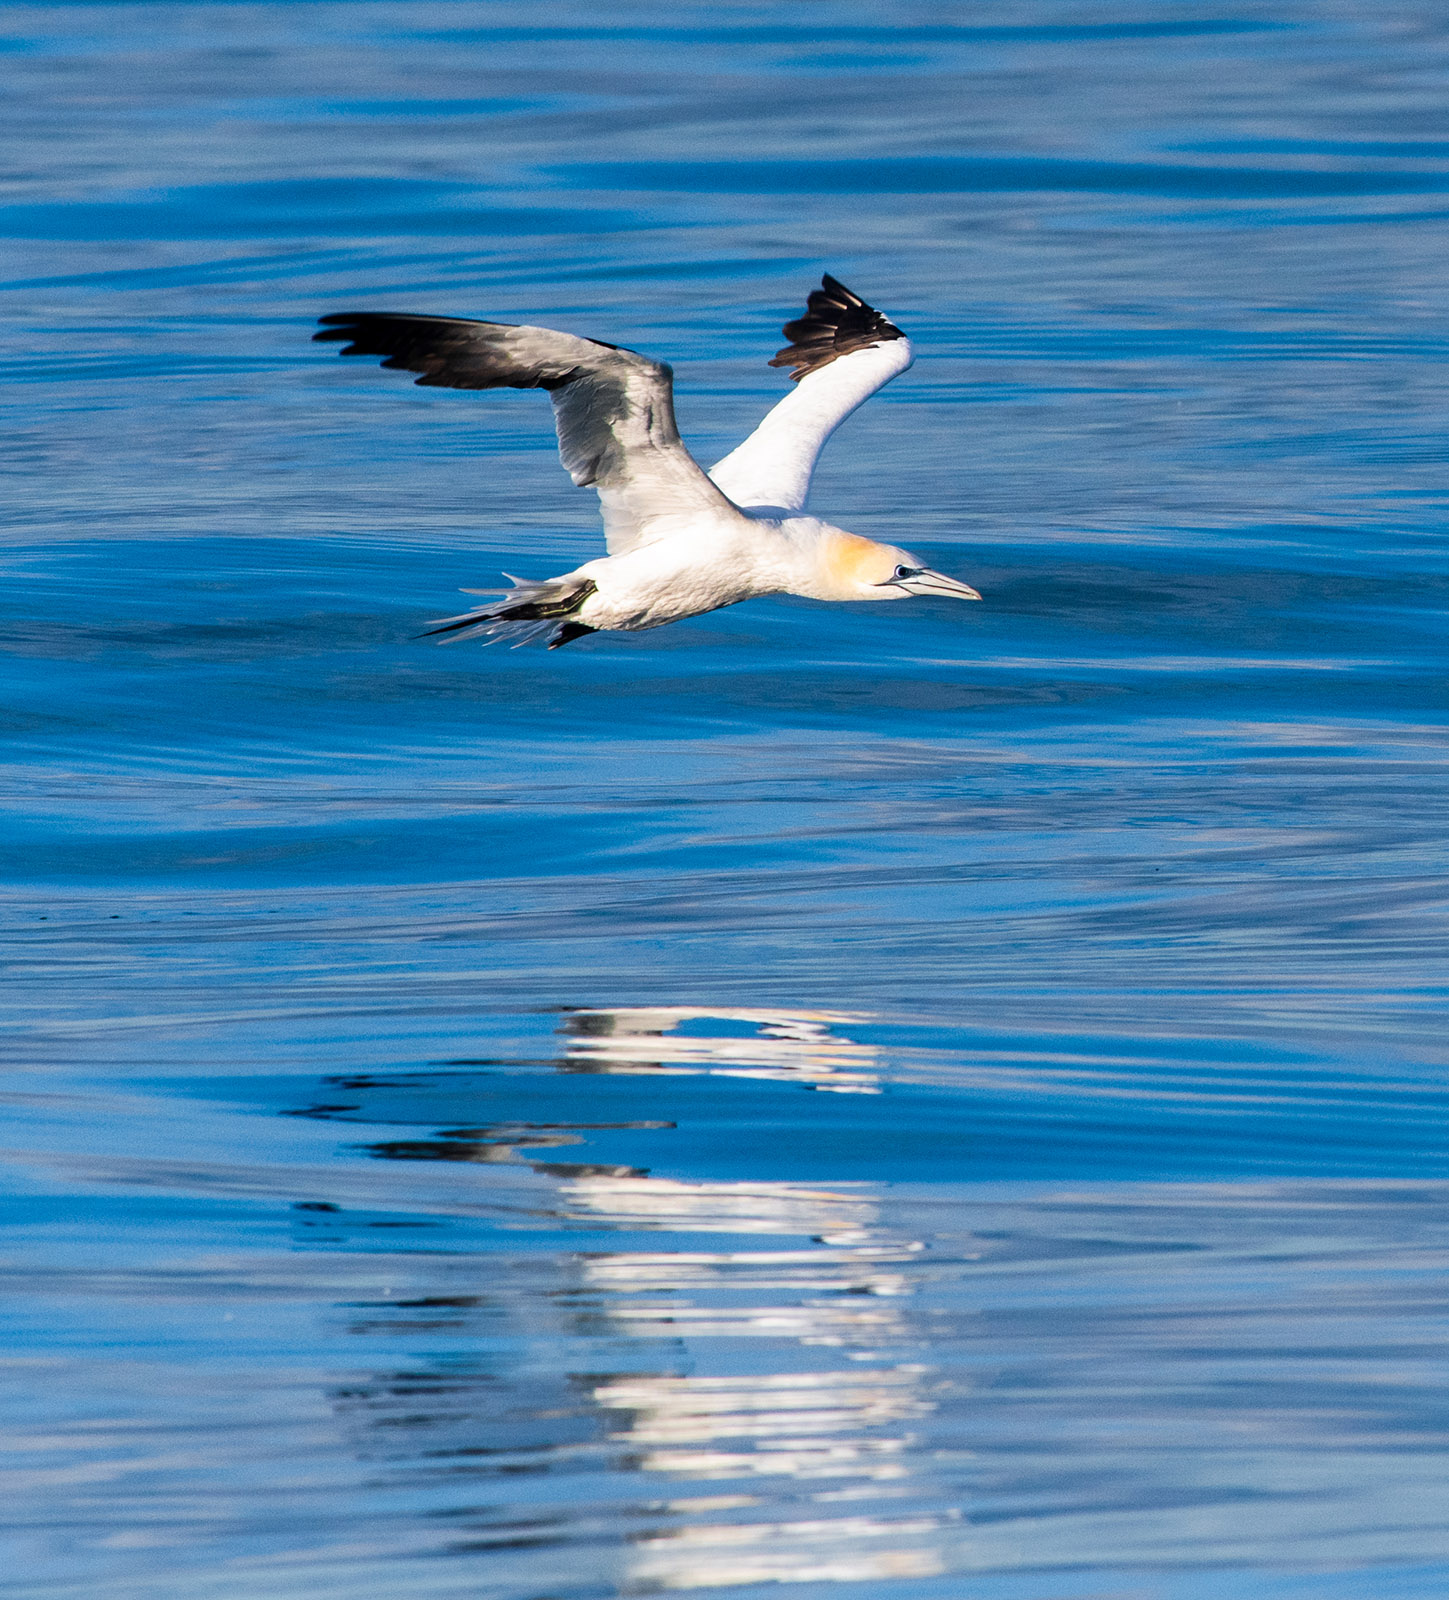 A photo of a northern gannet seabird, white with a yellow tinge on its neck and black wings, in full flight over bright blue water.